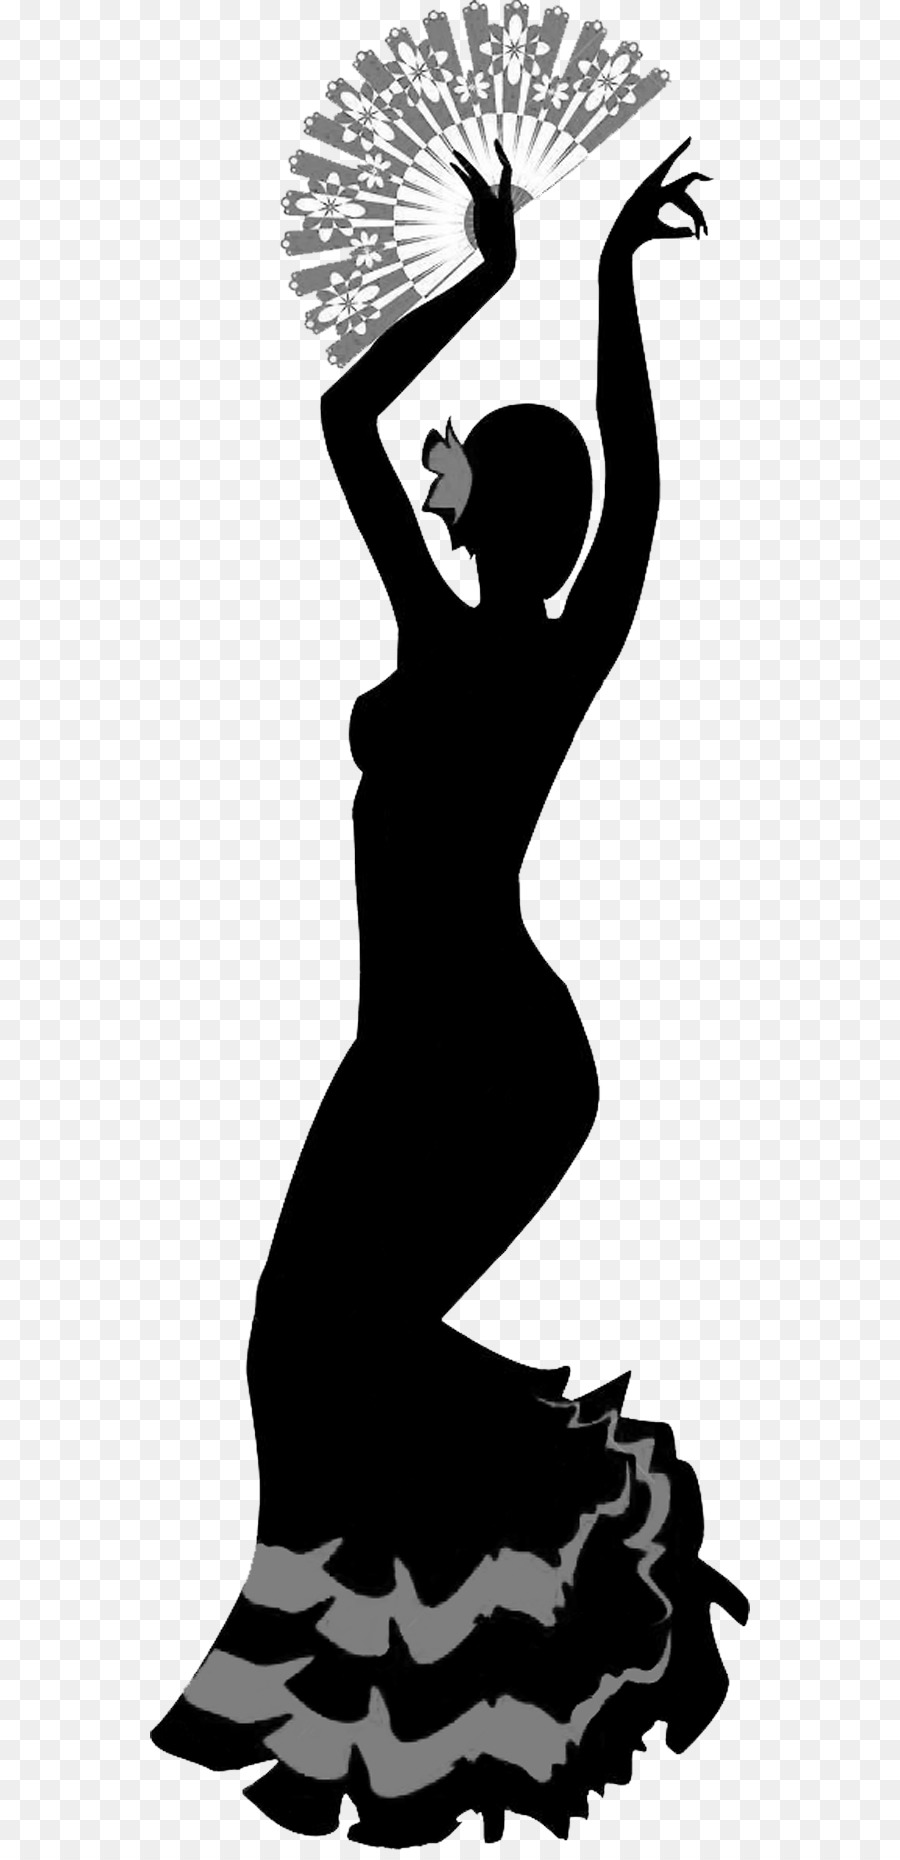 Flamenco Dance Silhouette - shadow png download - 600*1853 - Free Transparent Flamenco png Download.